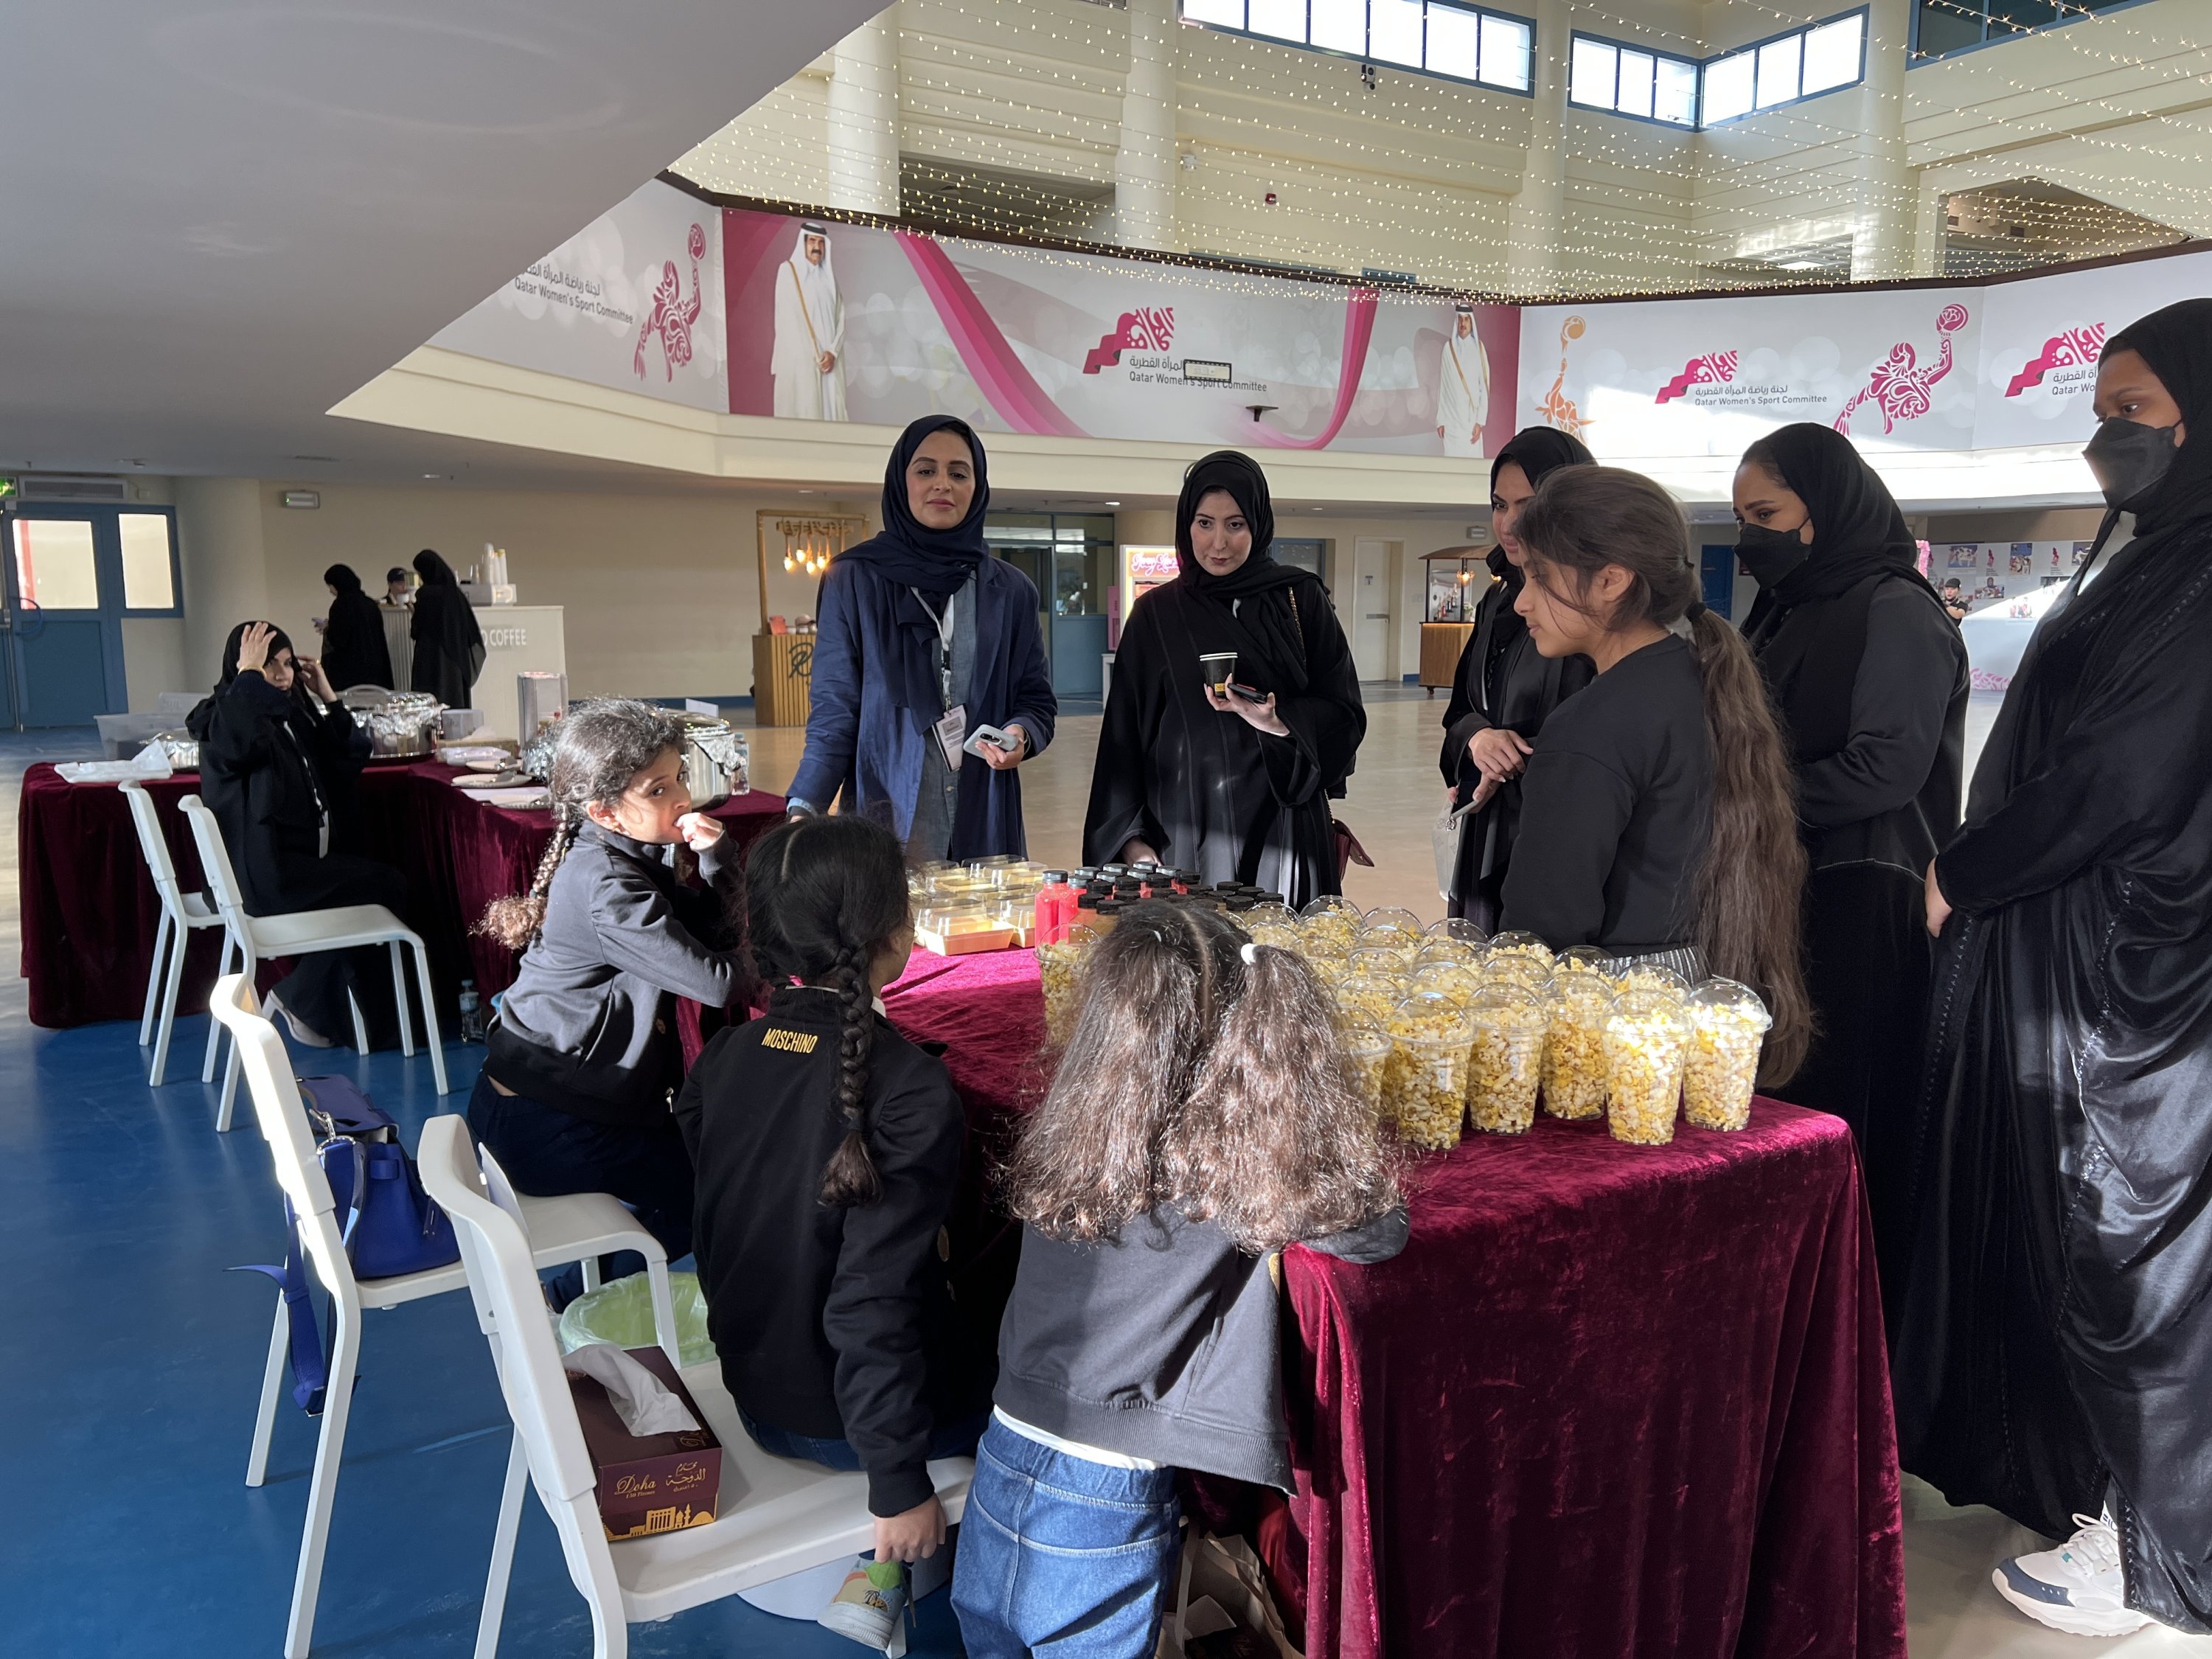 A charity sale is held at Aspire Park in Doha, Qatar to raise money for the victims of the twin earthquakes in Türkiye and Syria, Feb. 18, 2023. (AA Photo)